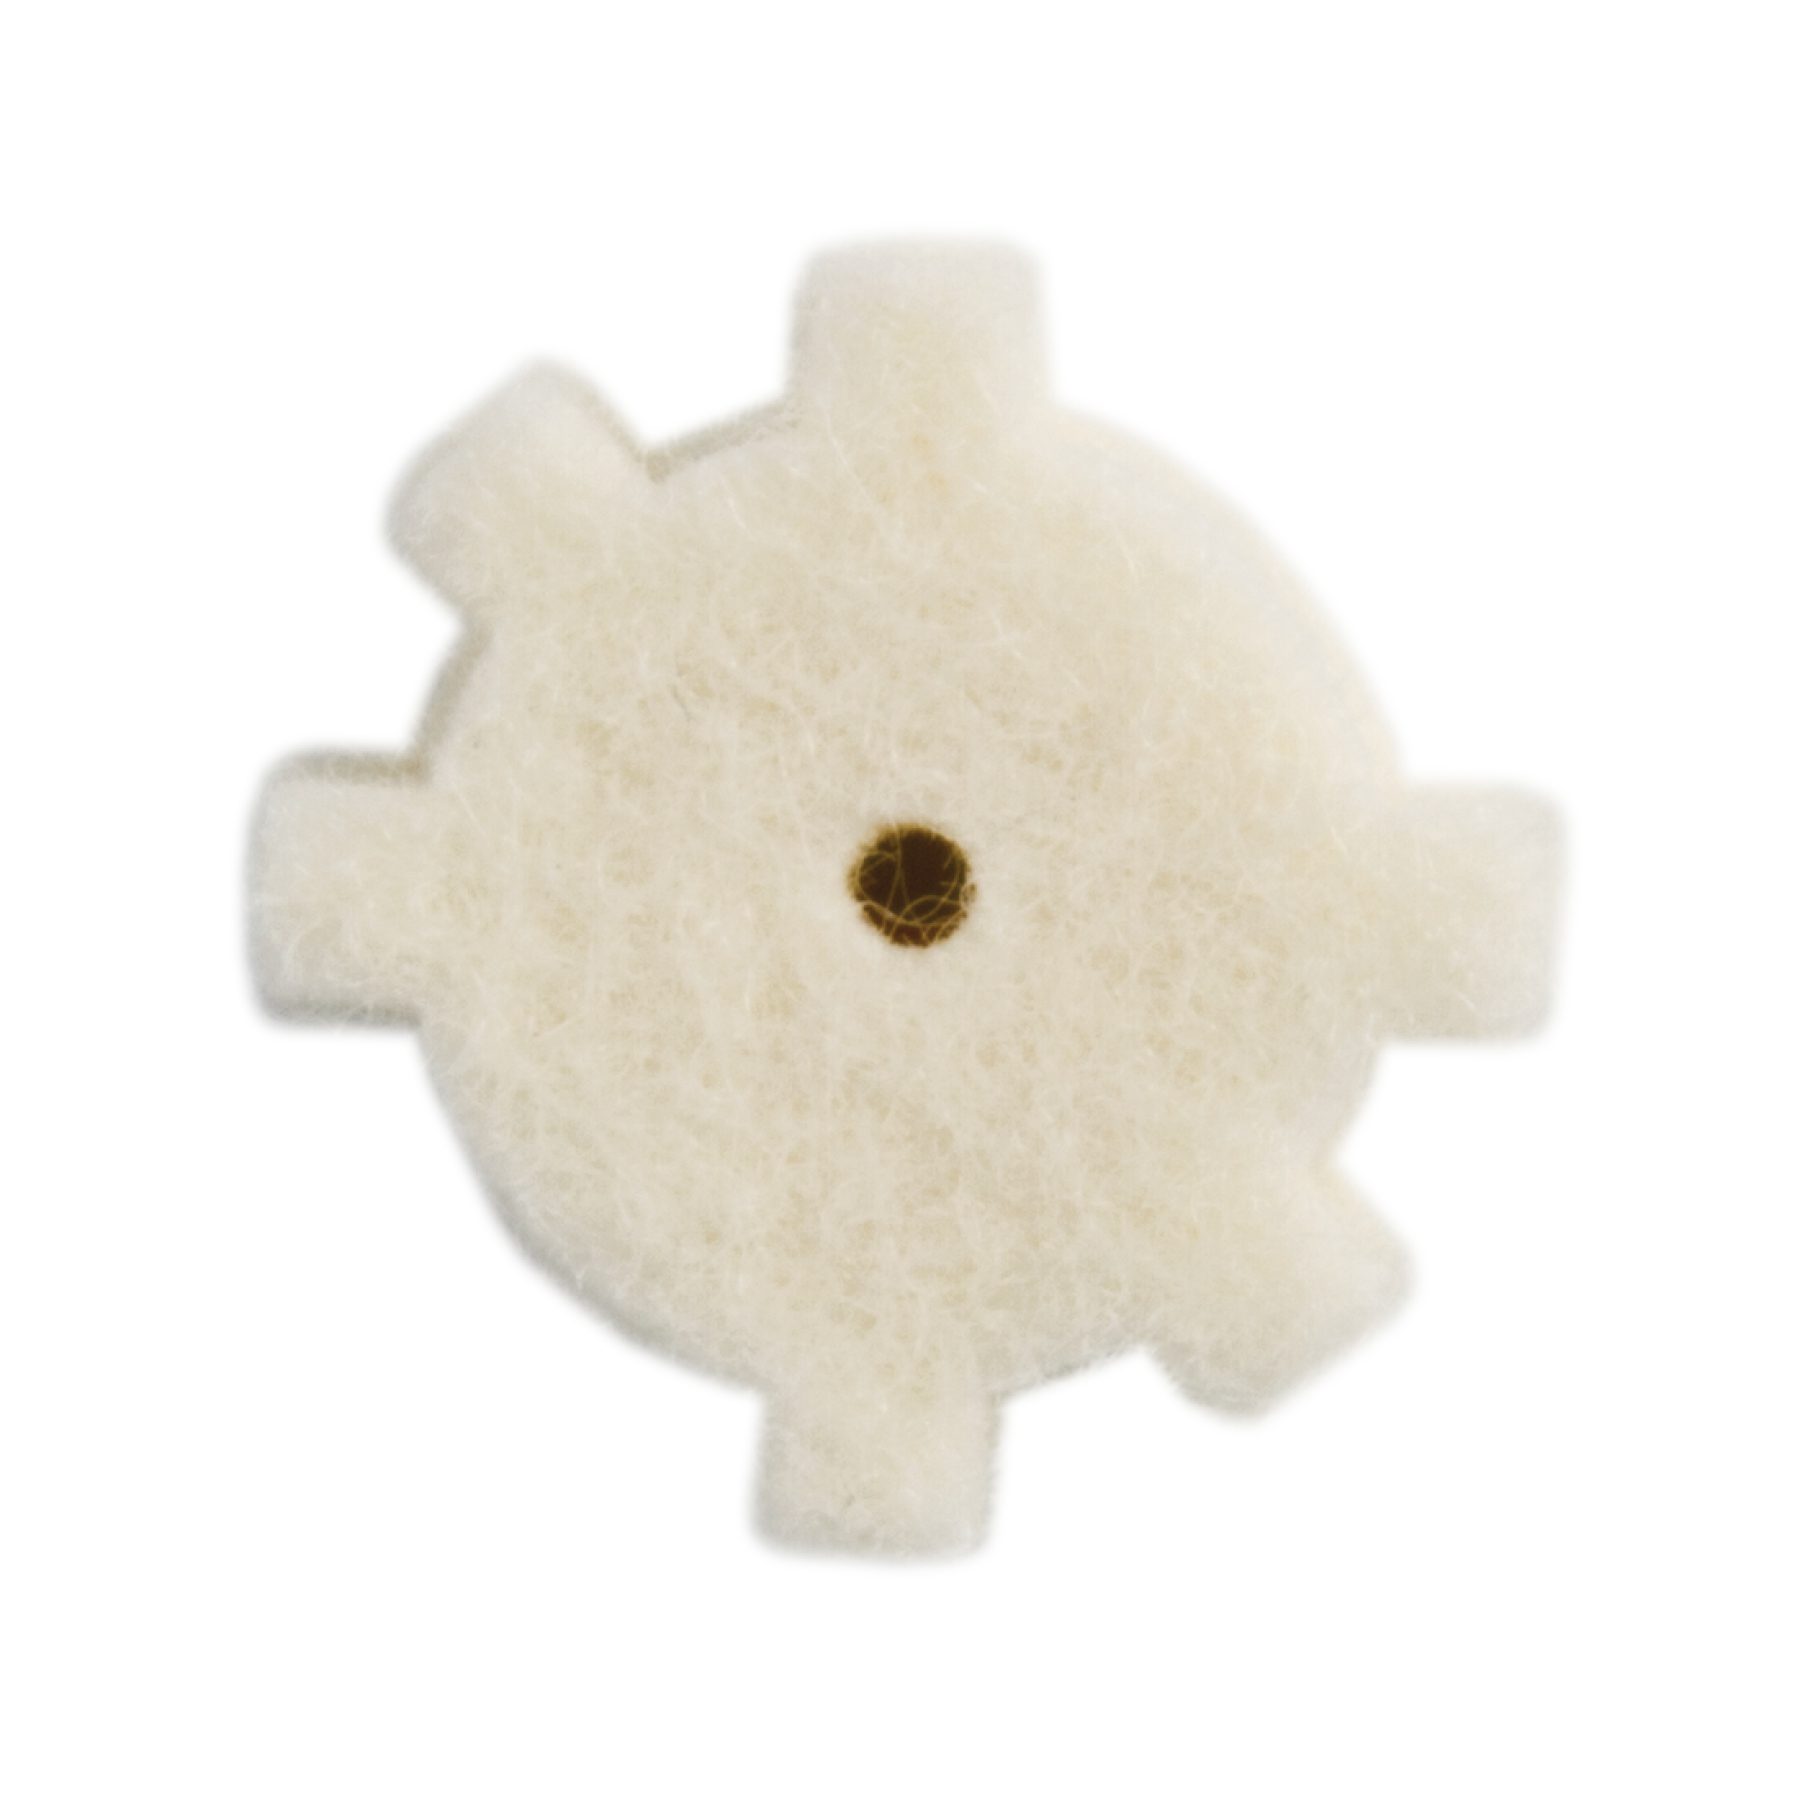 a white wool pad with a brown button